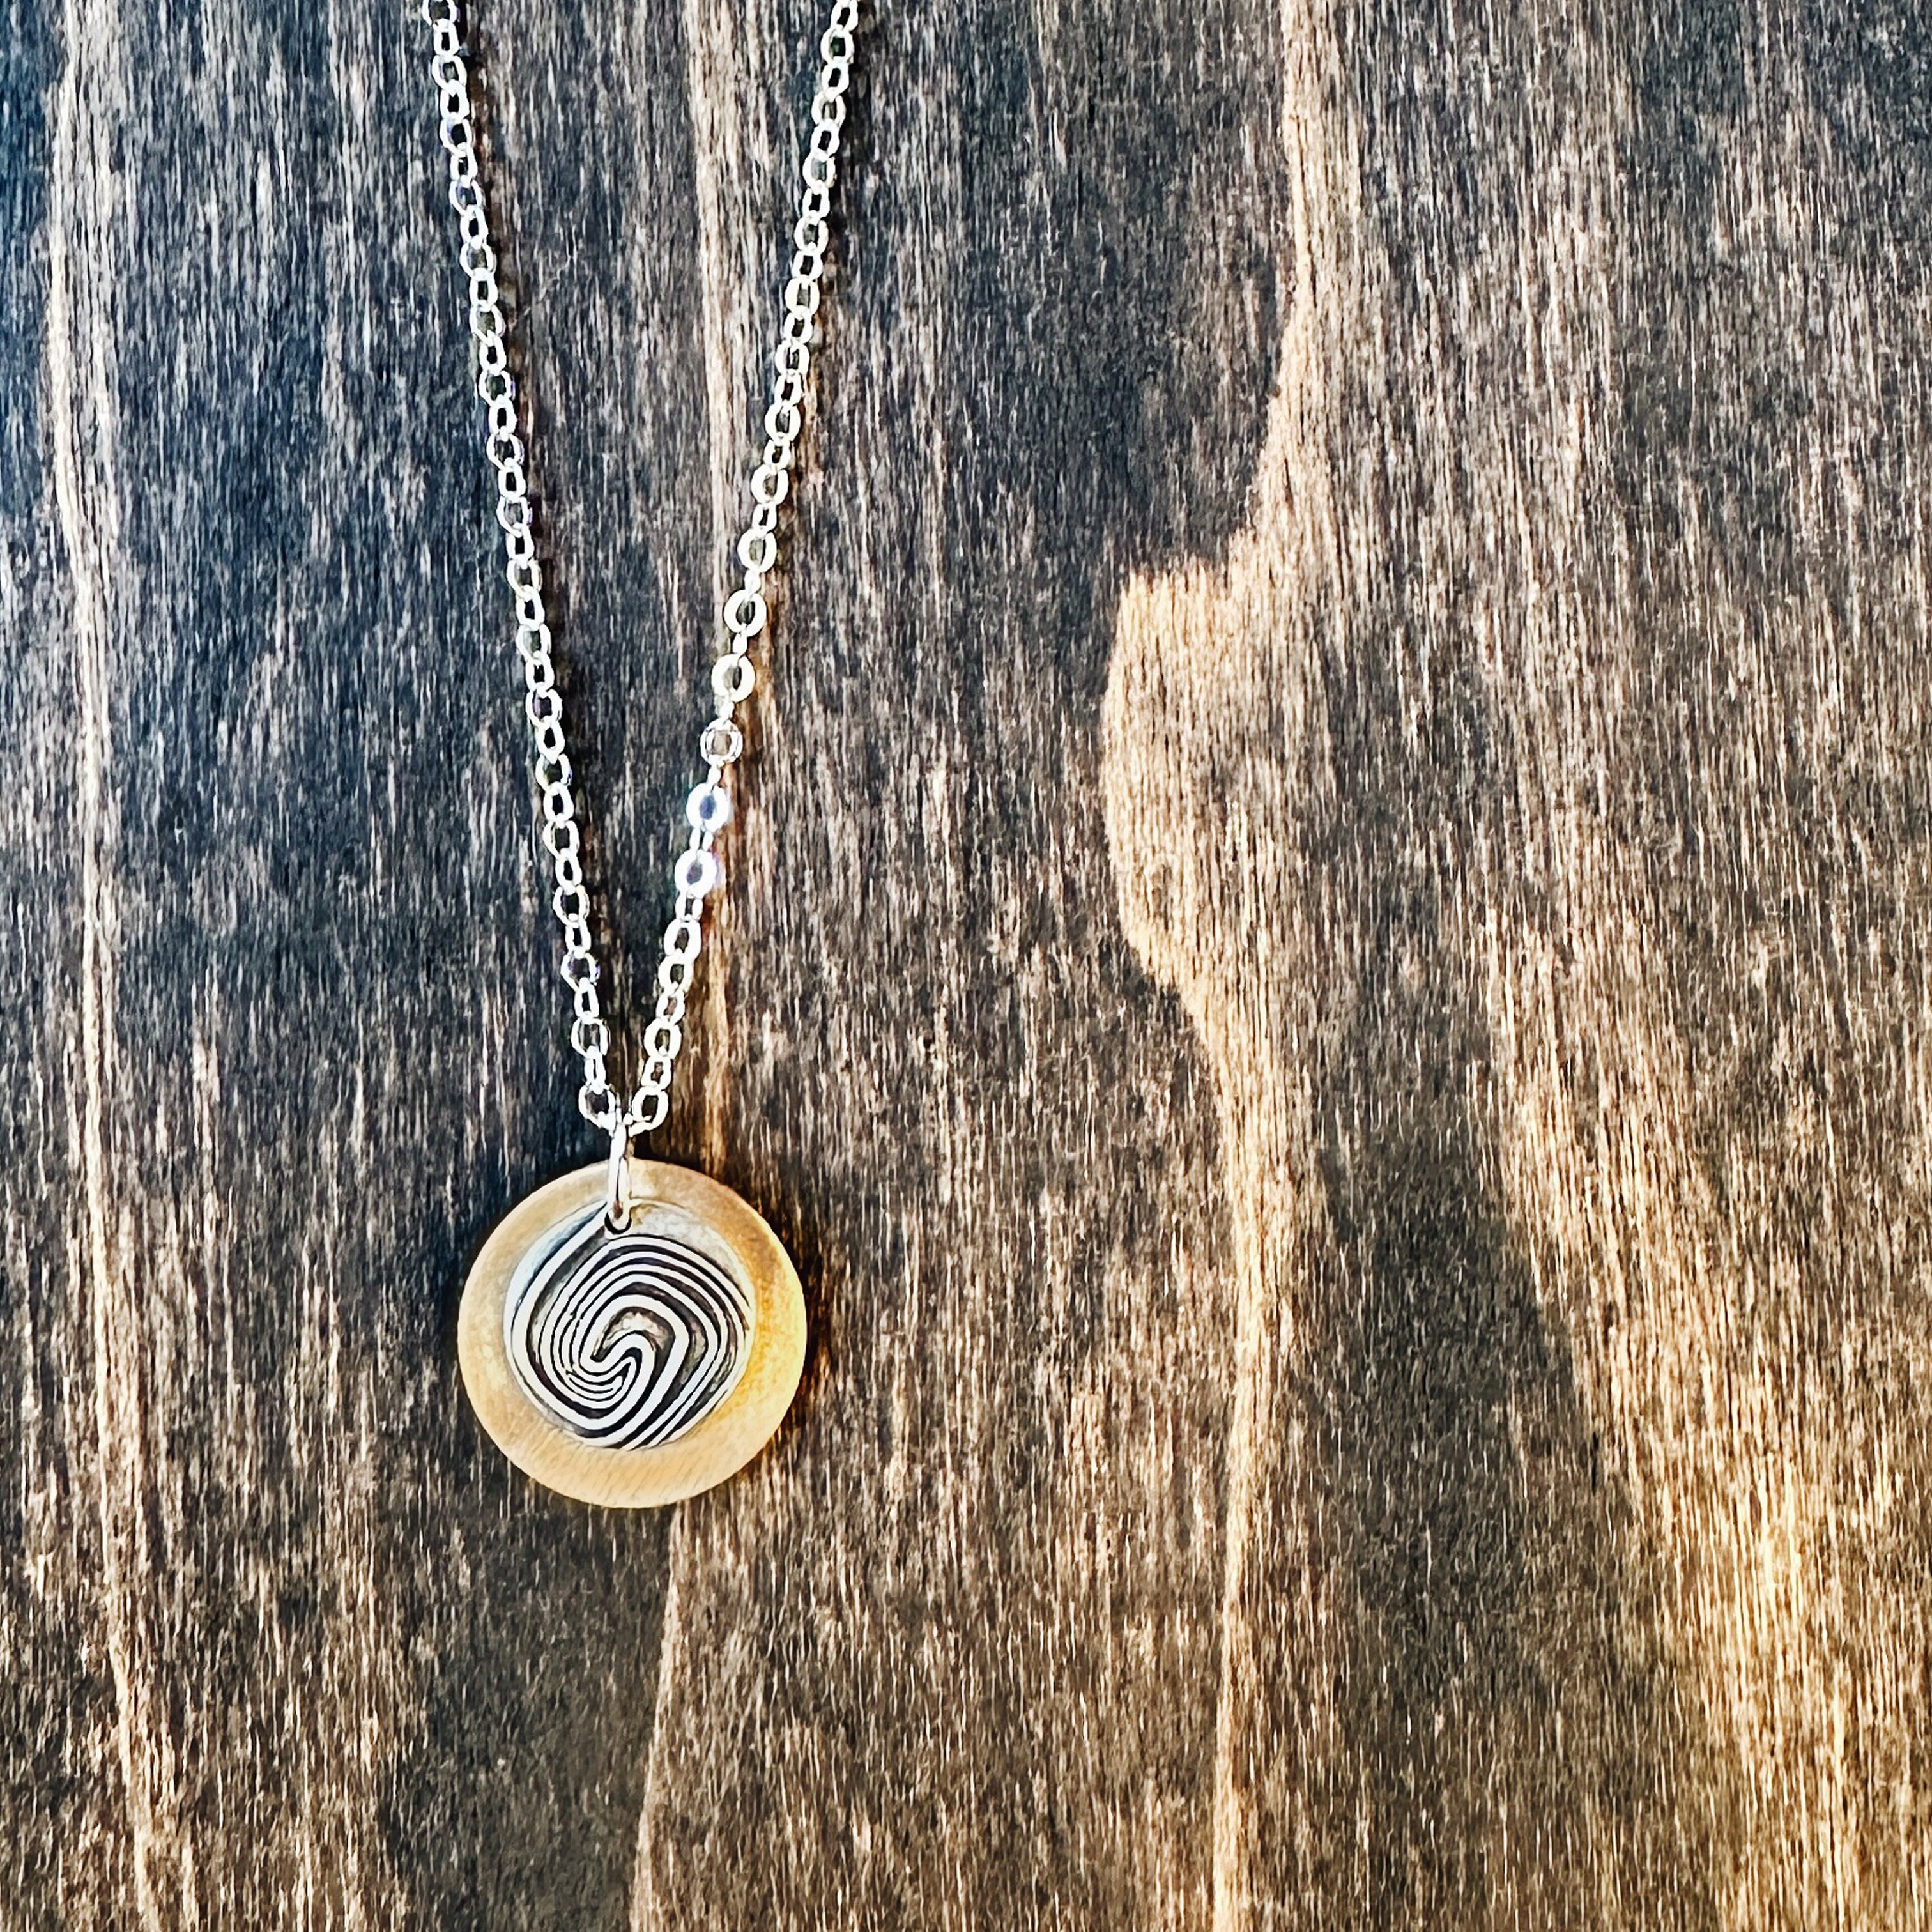 Swirl of Serenity Charm Necklace, Mixed Metals